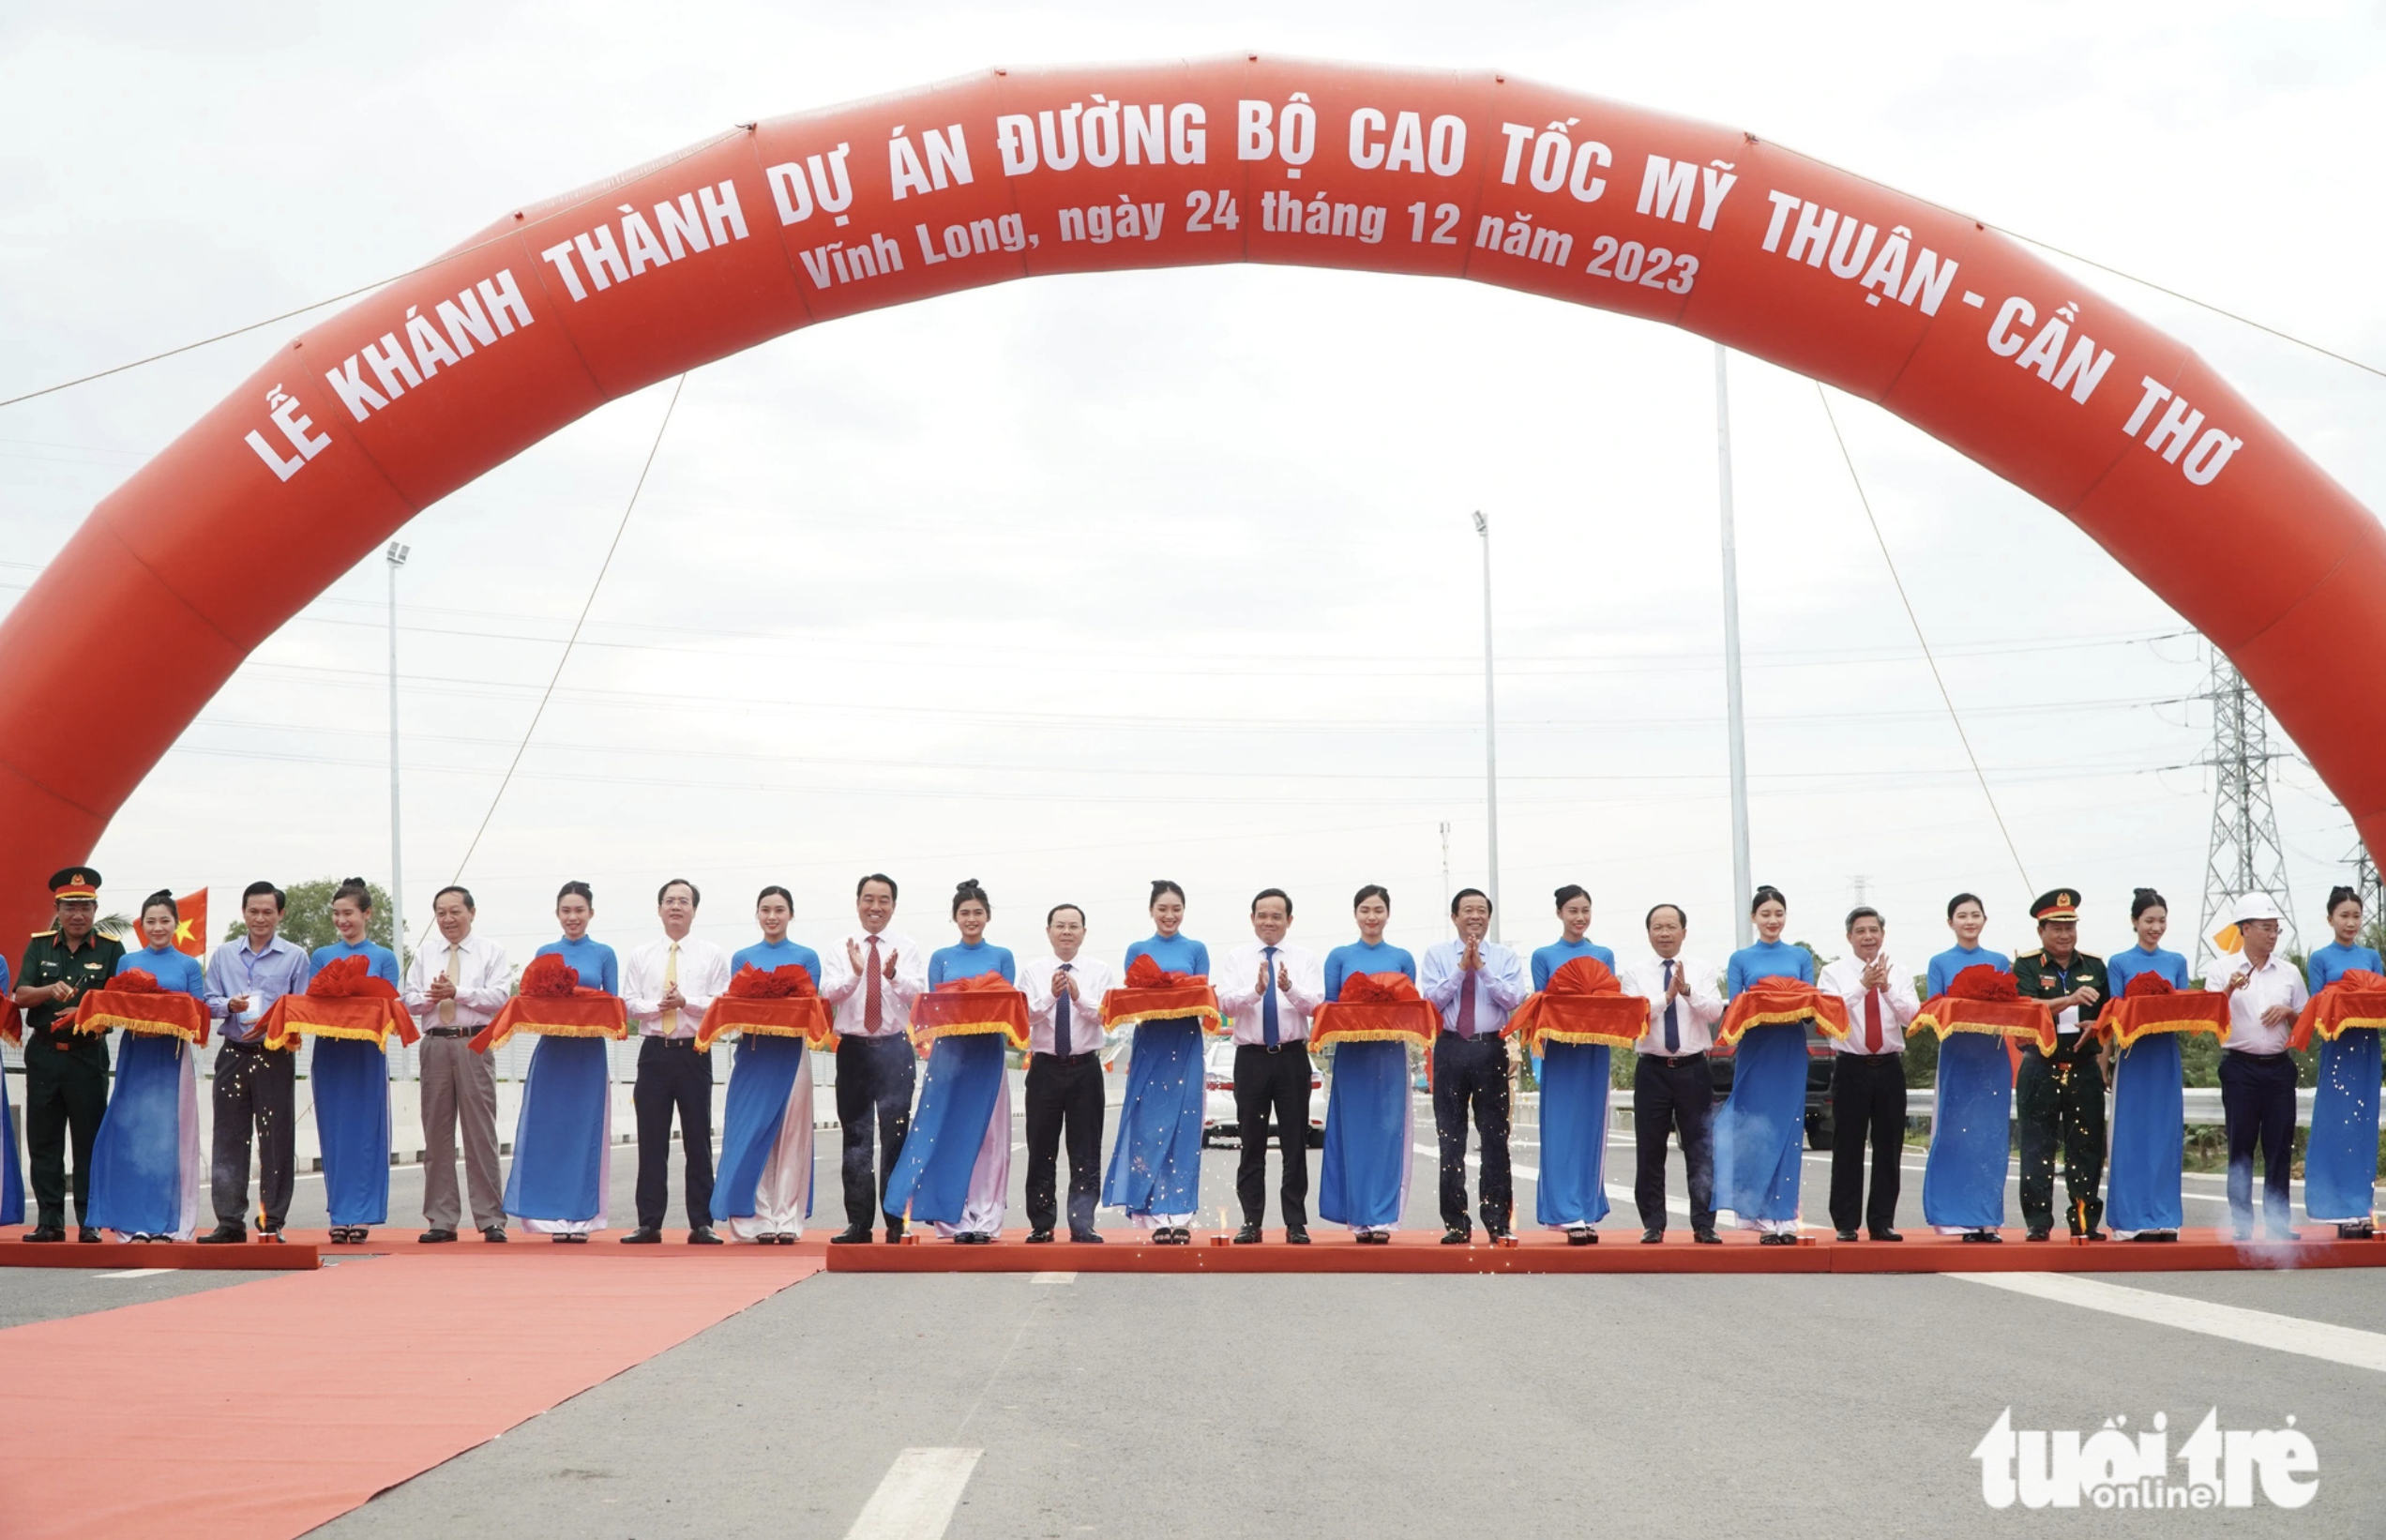 My Thuan-Can Tho expressway, My Thuan 2 Bridge inaugurated in southern Vietnam